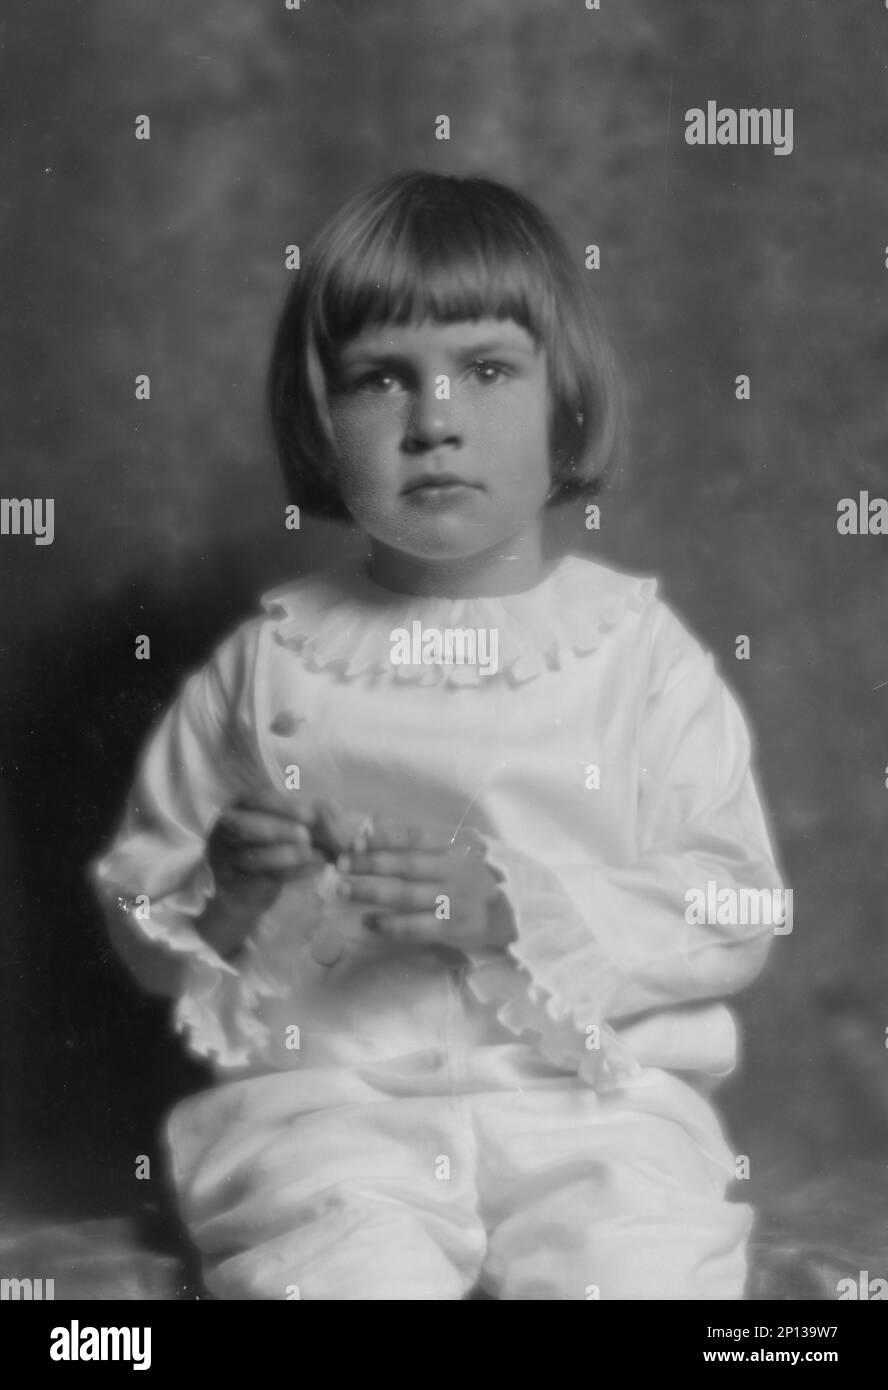 Rumsey, Charles Cary, Mrs., child of, portrait photograph, 1914 May 11. Stock Photo